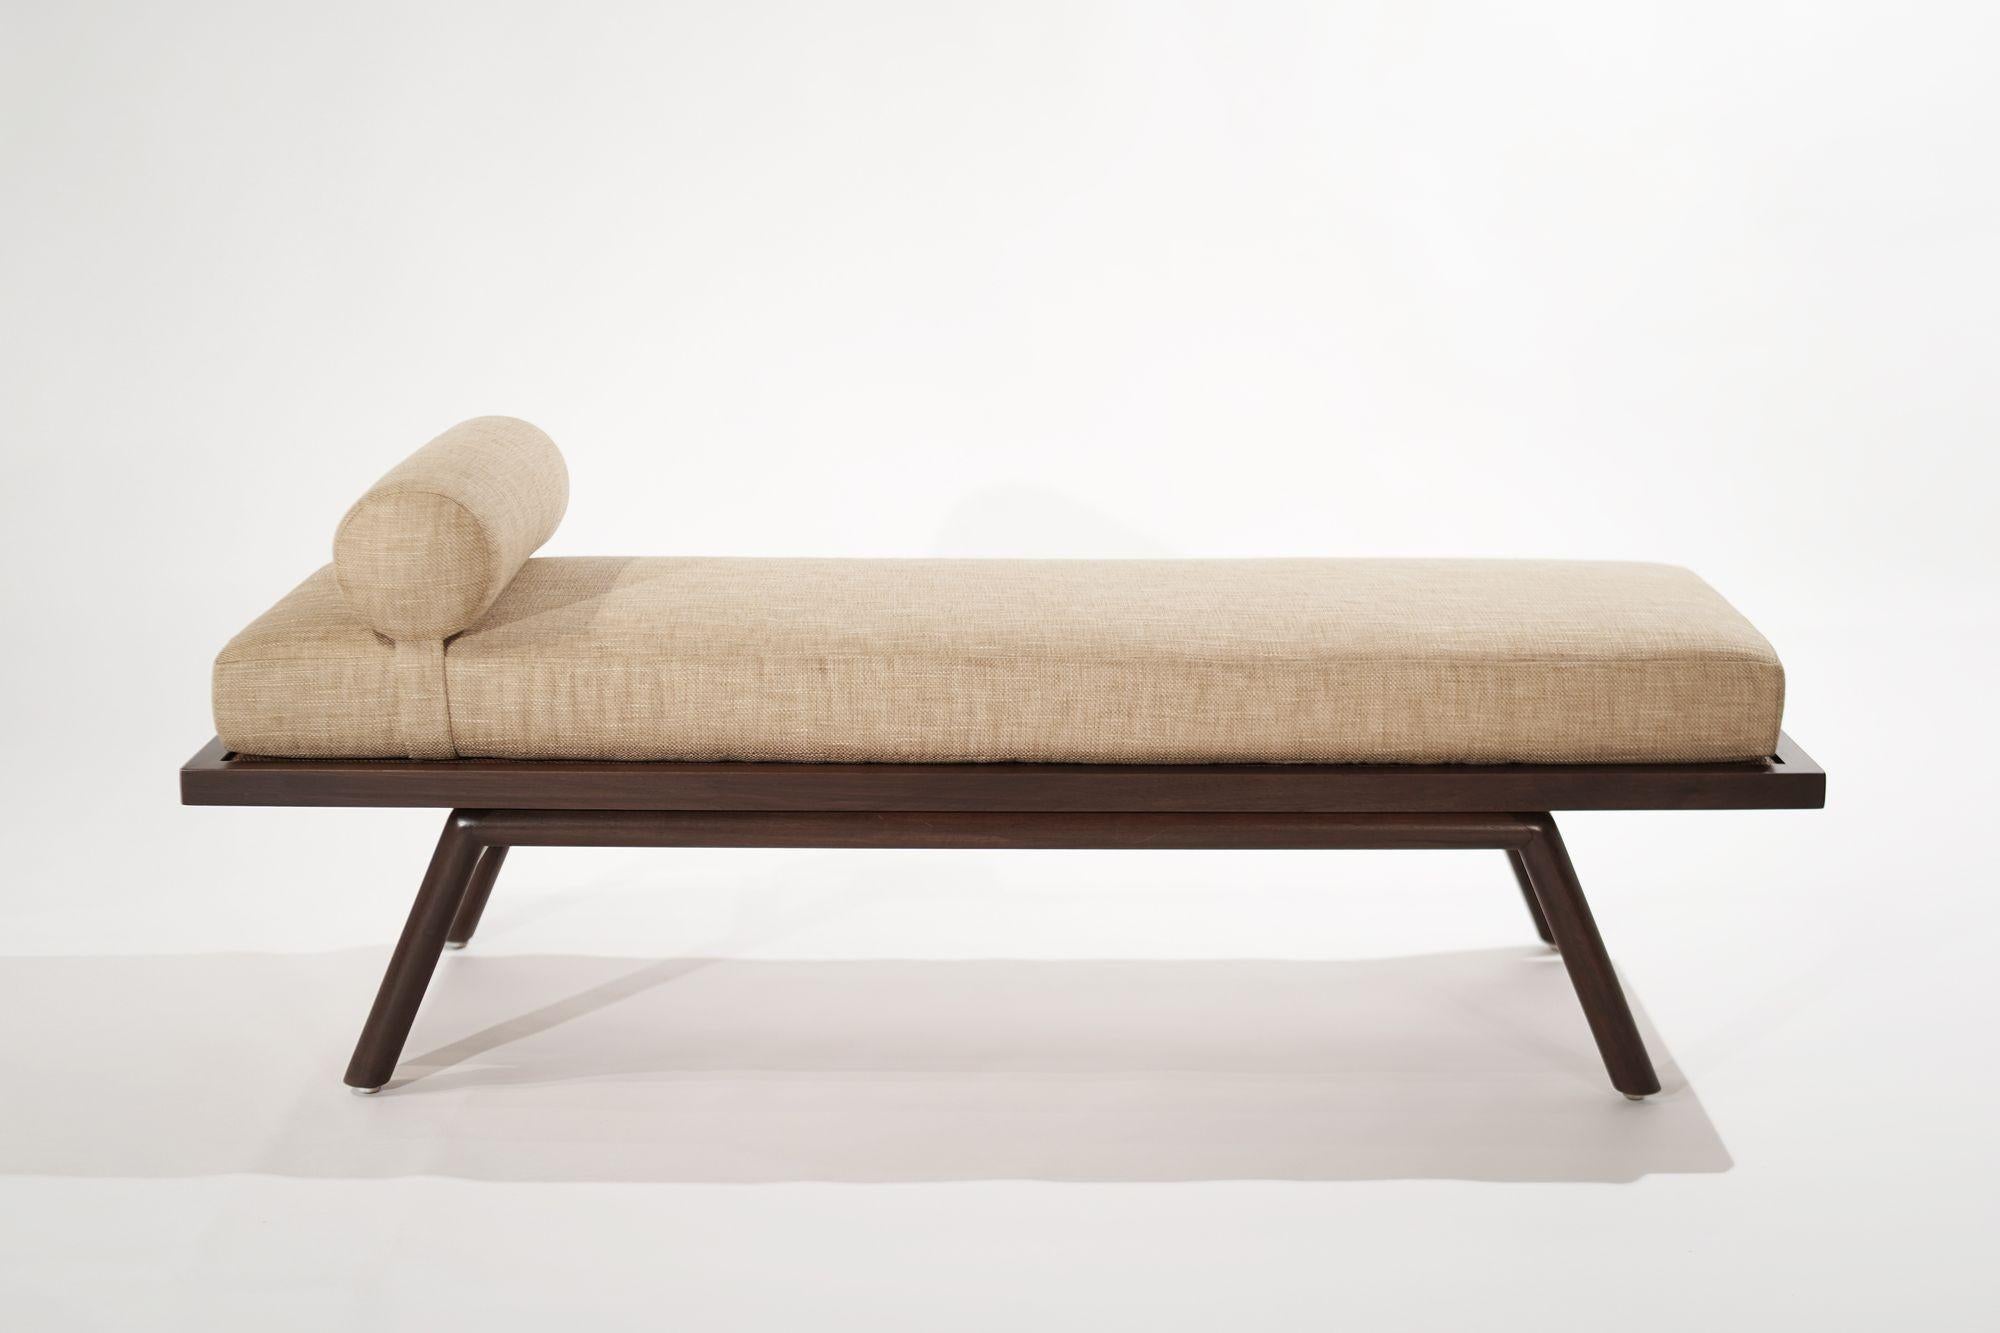 Mid-Century Modern daybed or coffee table designed by T.H. Robsjohn-Gibbings for Widdicomb, circa 1950-1959. This multifunctional beauty serves as a daybed/bench as well as a coffee table with a caned top, the cushion is upholstered in sand twill.
